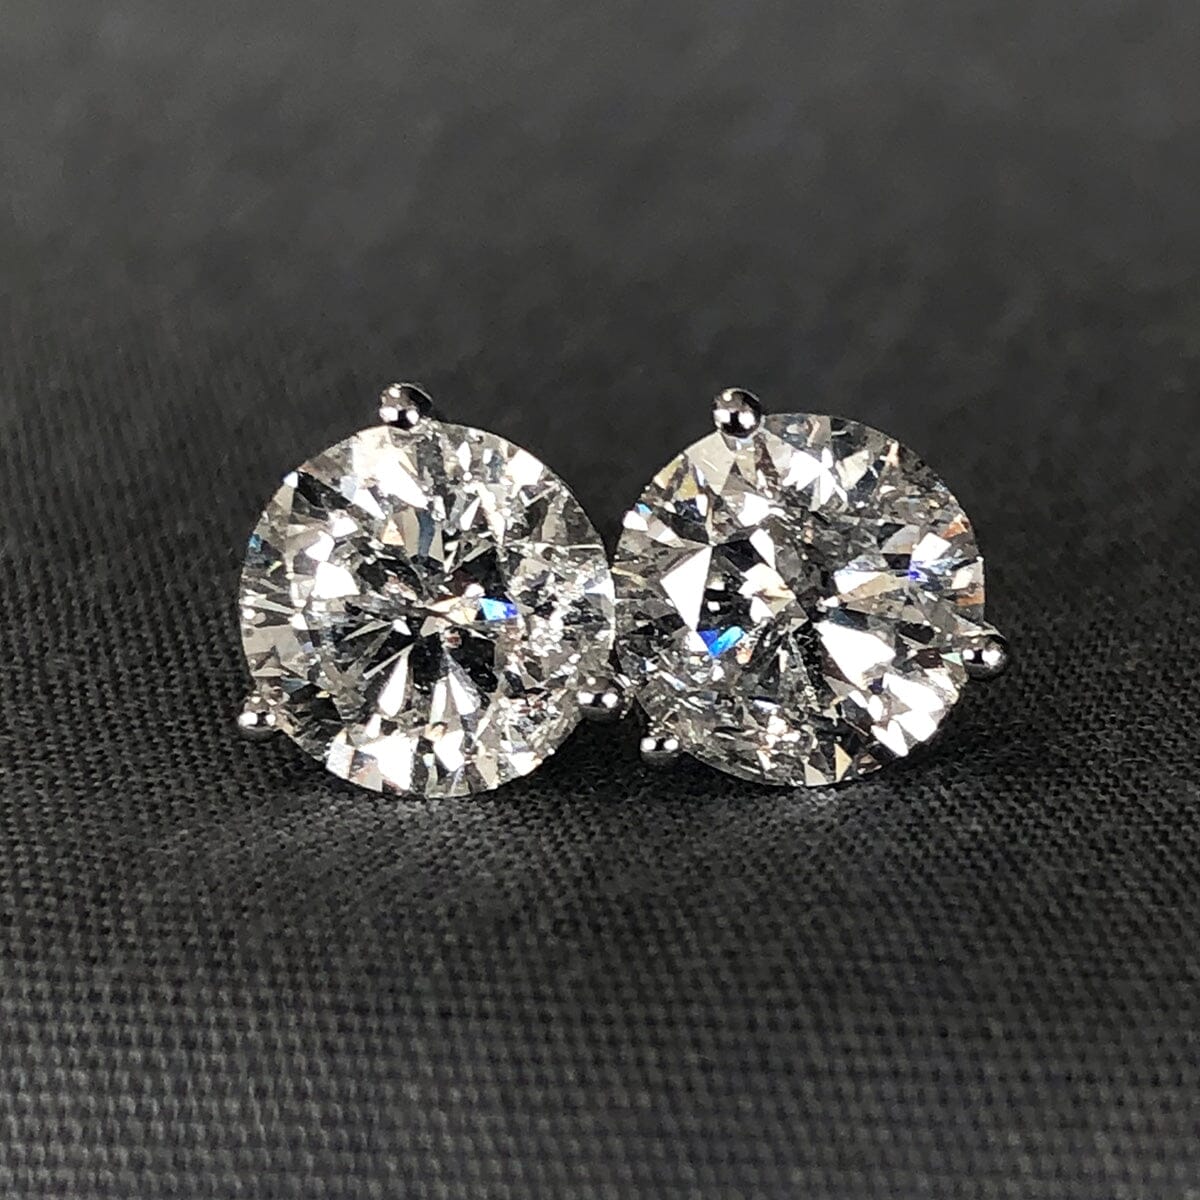 Great Lakes Boutique White Gold Diamond Stud Earrings (3.13 Carat)